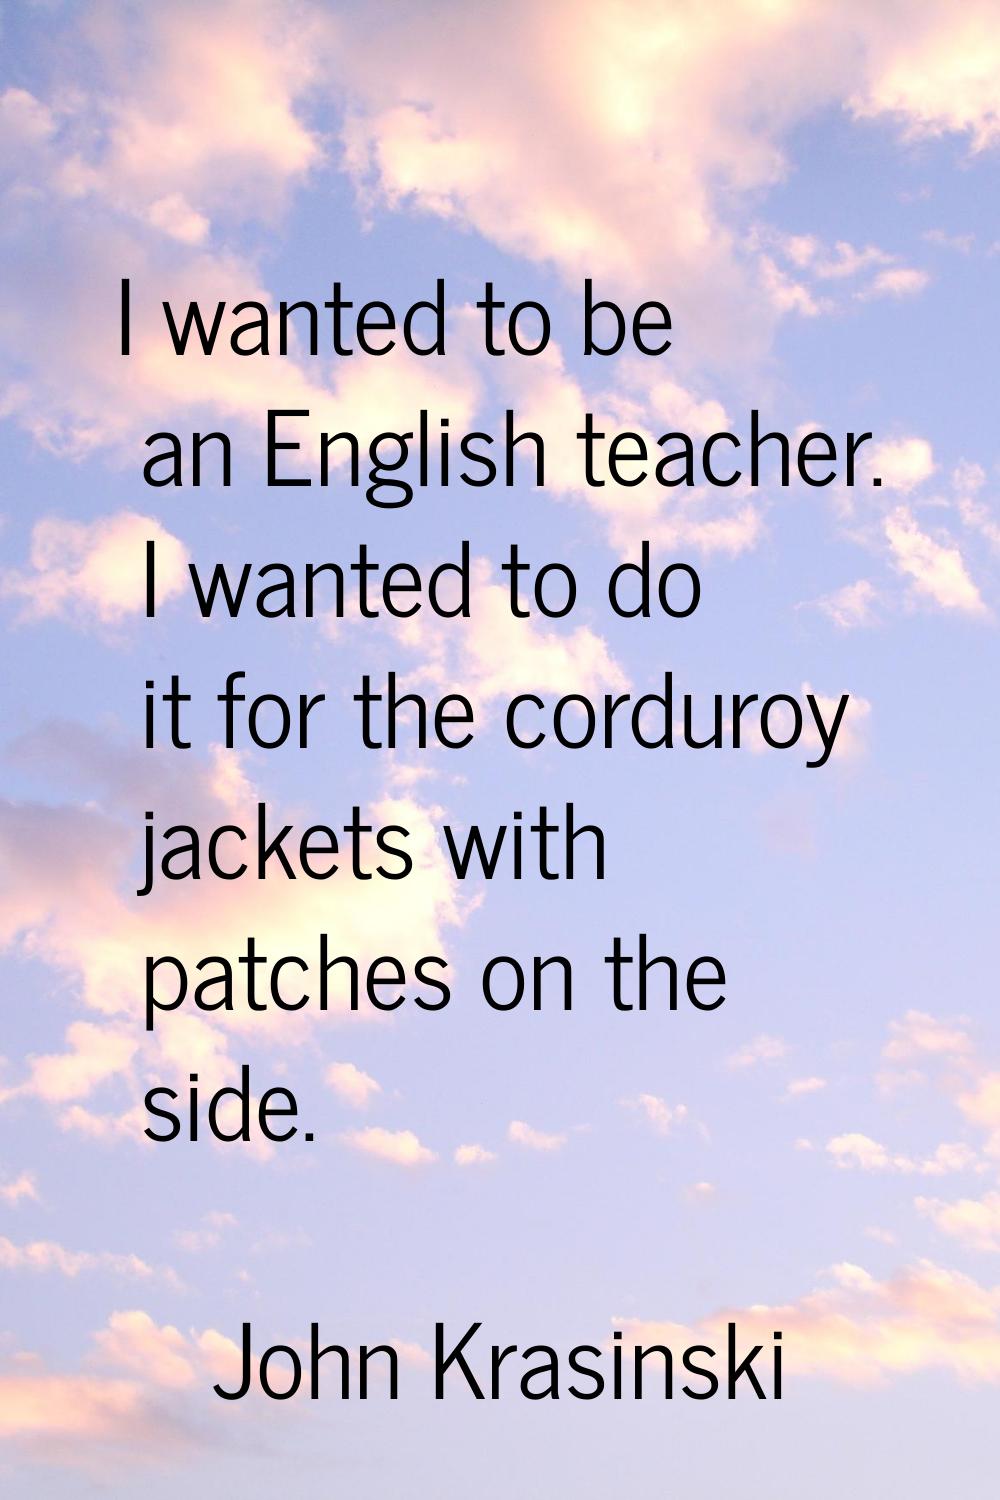 I wanted to be an English teacher. I wanted to do it for the corduroy jackets with patches on the s